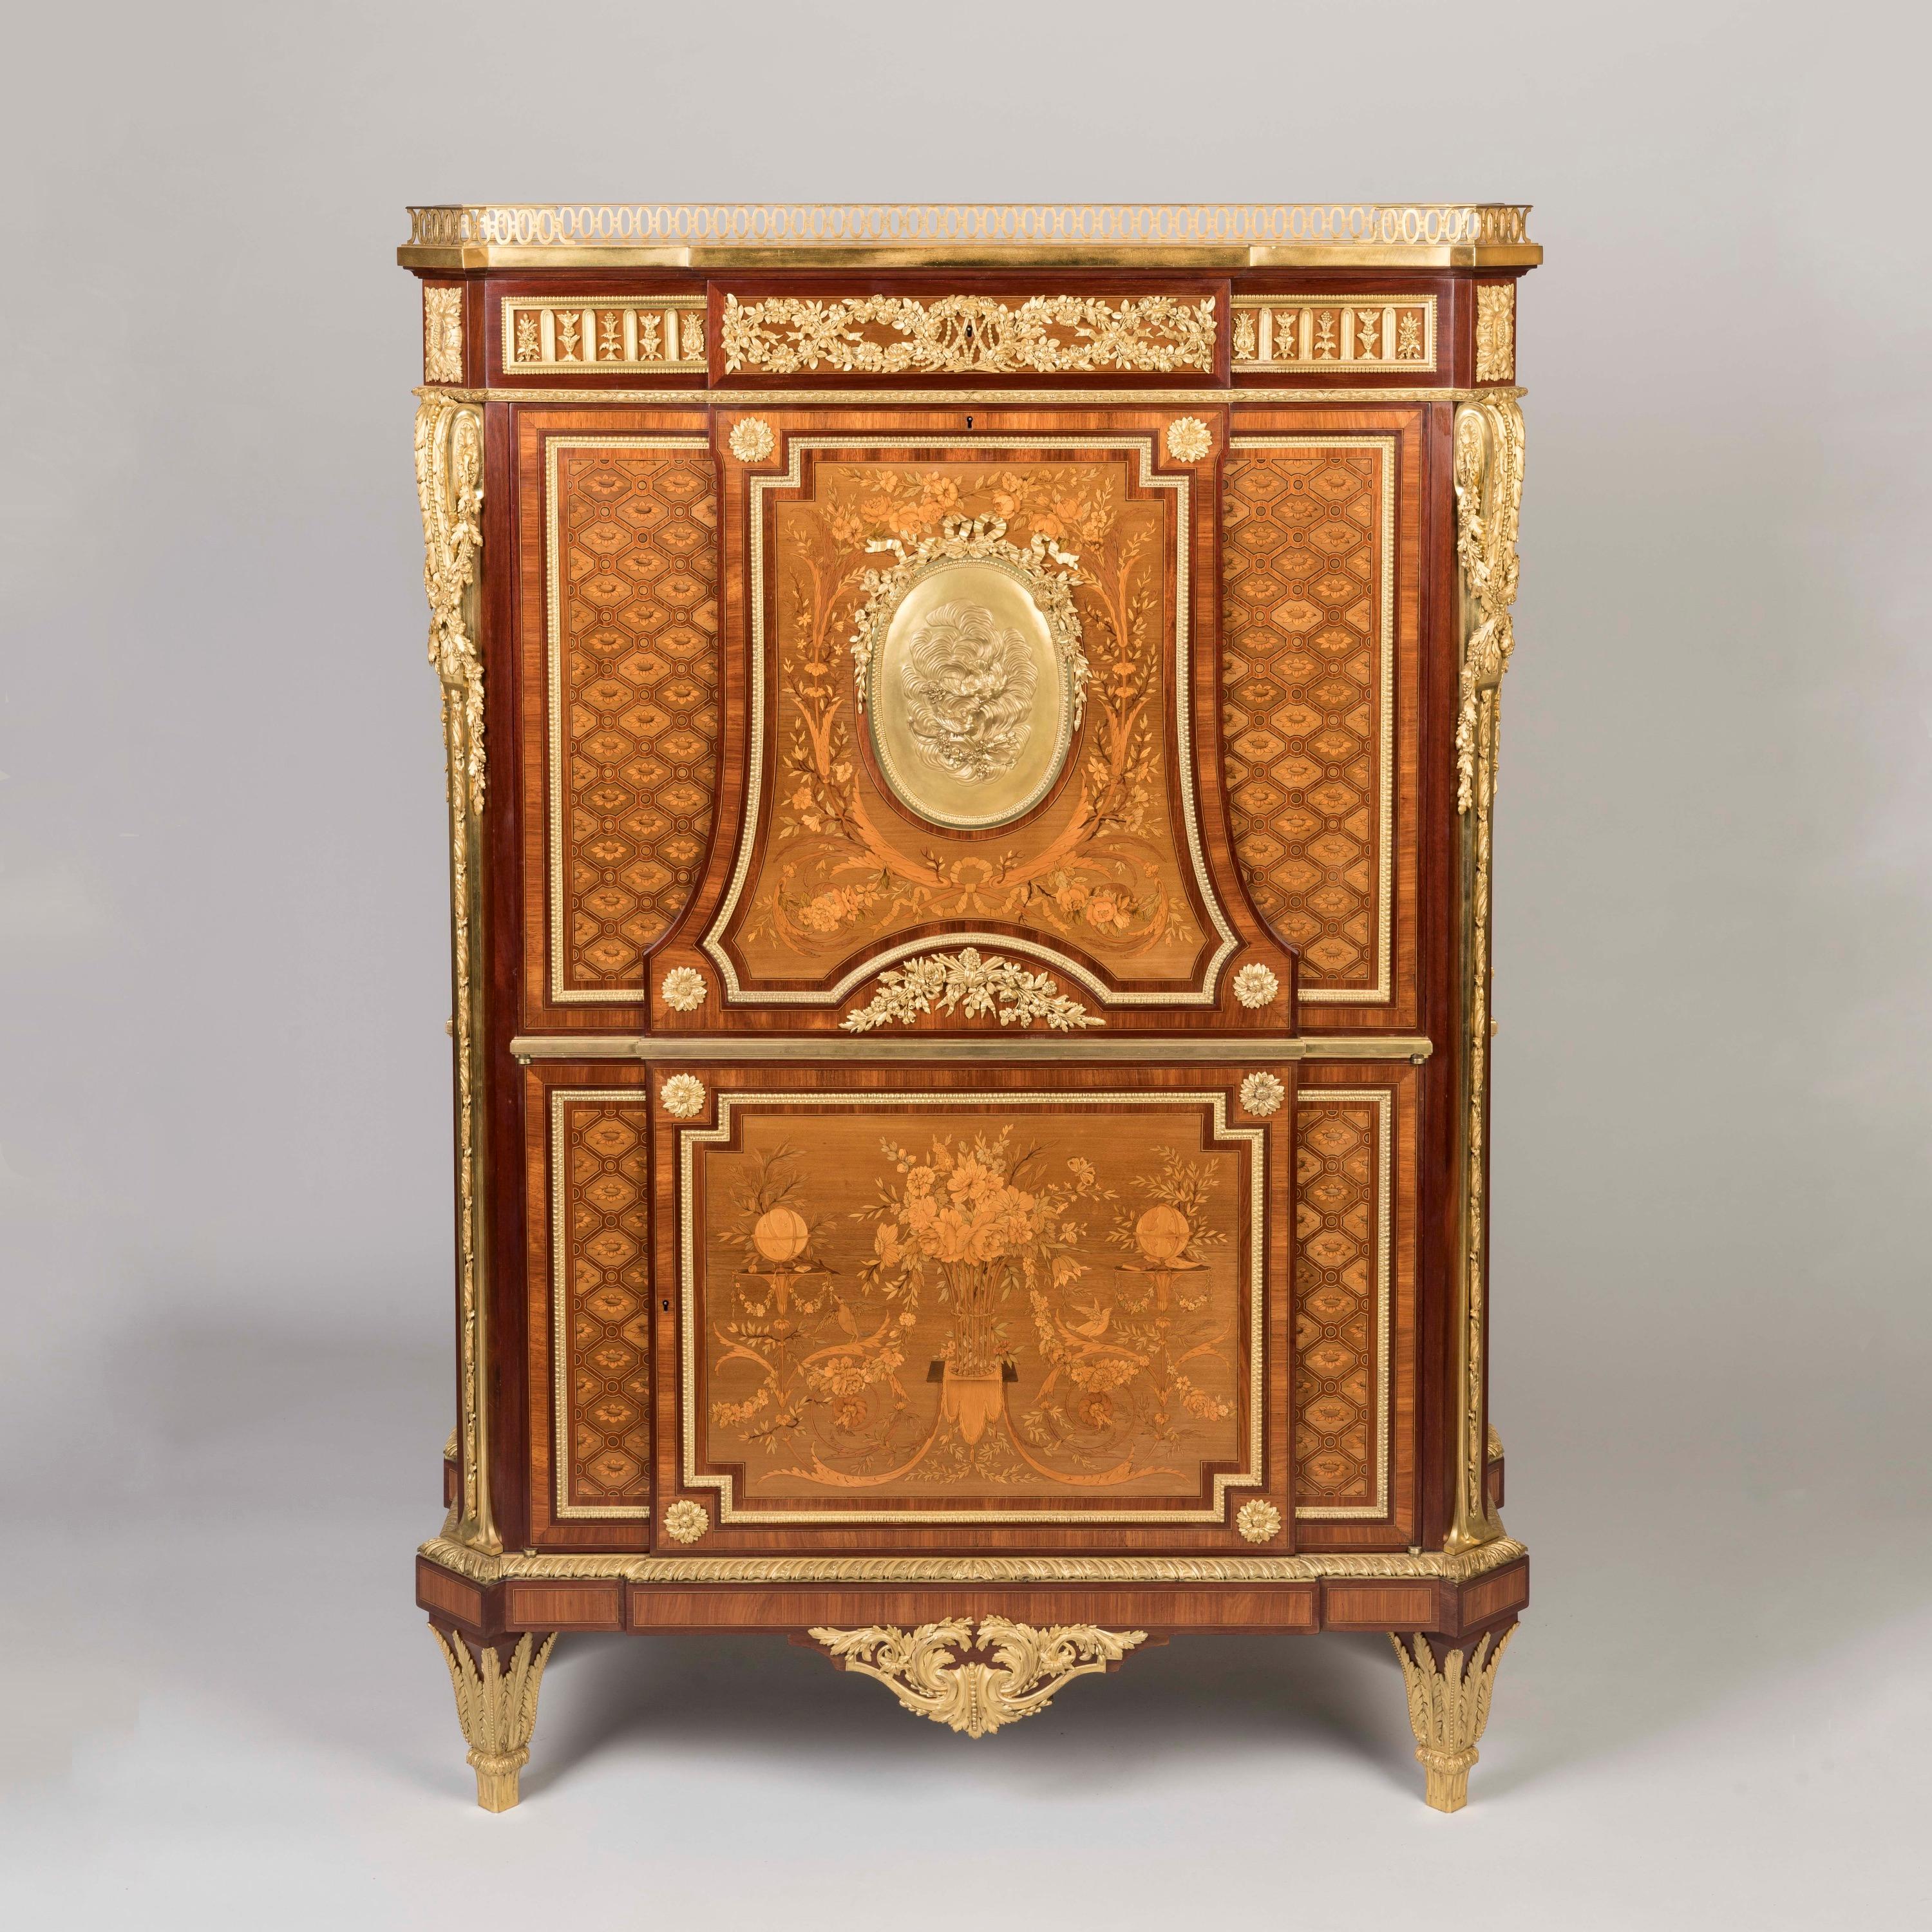 An Exceptionally Rare Secrétaire à Abattant
After the designs of Jean-Henri Riesener for Marie Antoinette

By Paul Sormani of Paris

Of upright rectangular form with canted corners and slight breakfront profile, veneered with panels of marquetry